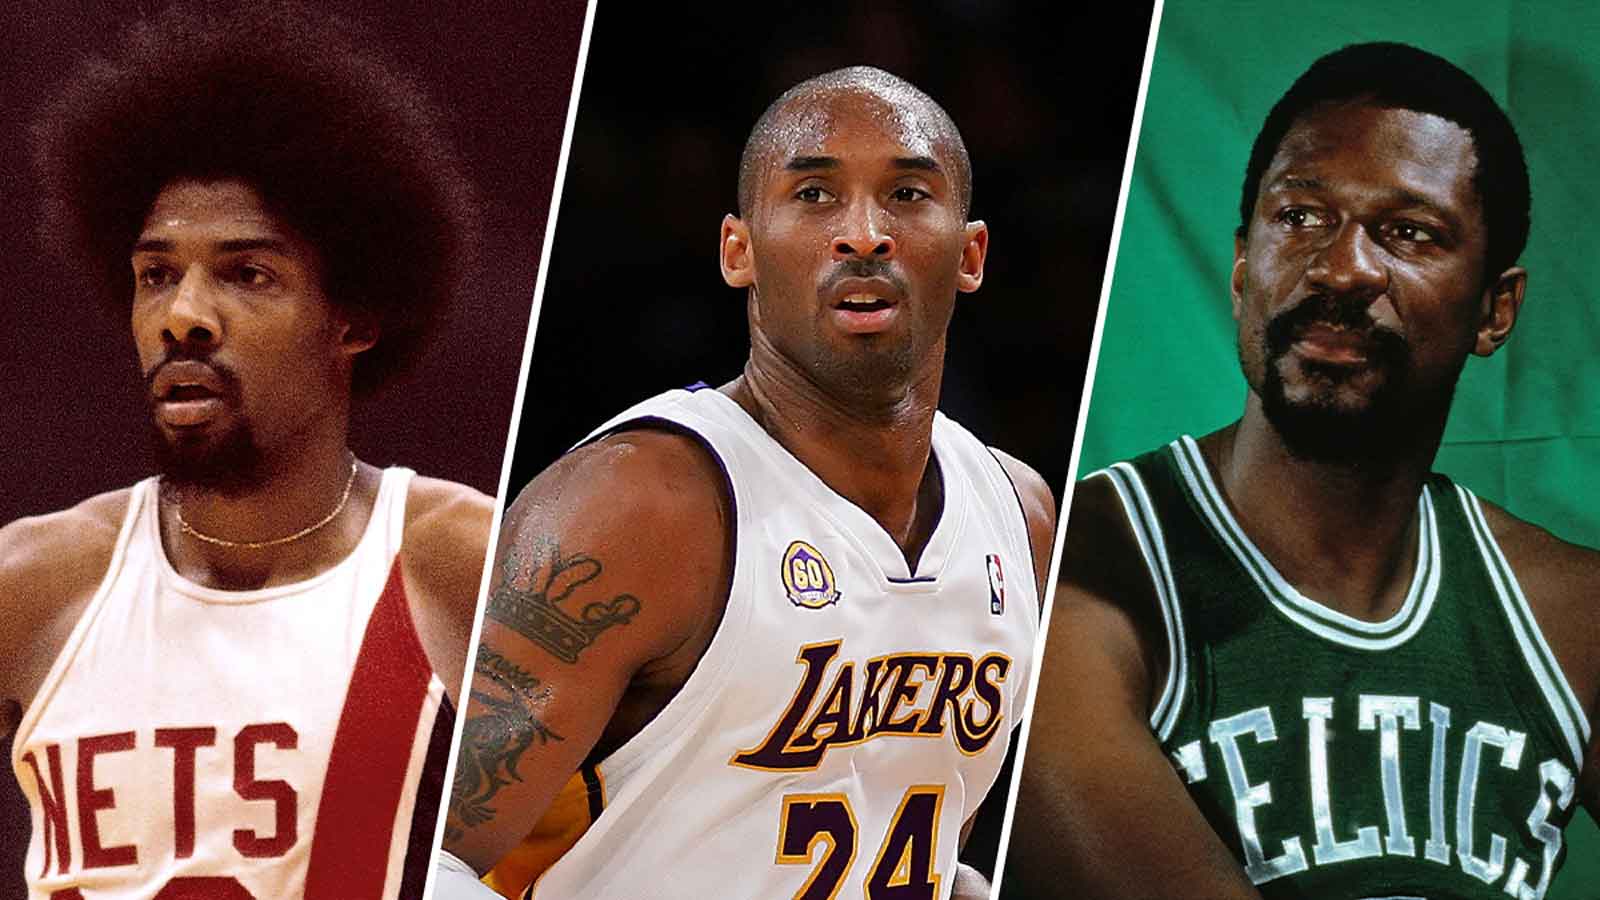 Team-by-team look at every retired jersey in NBA history